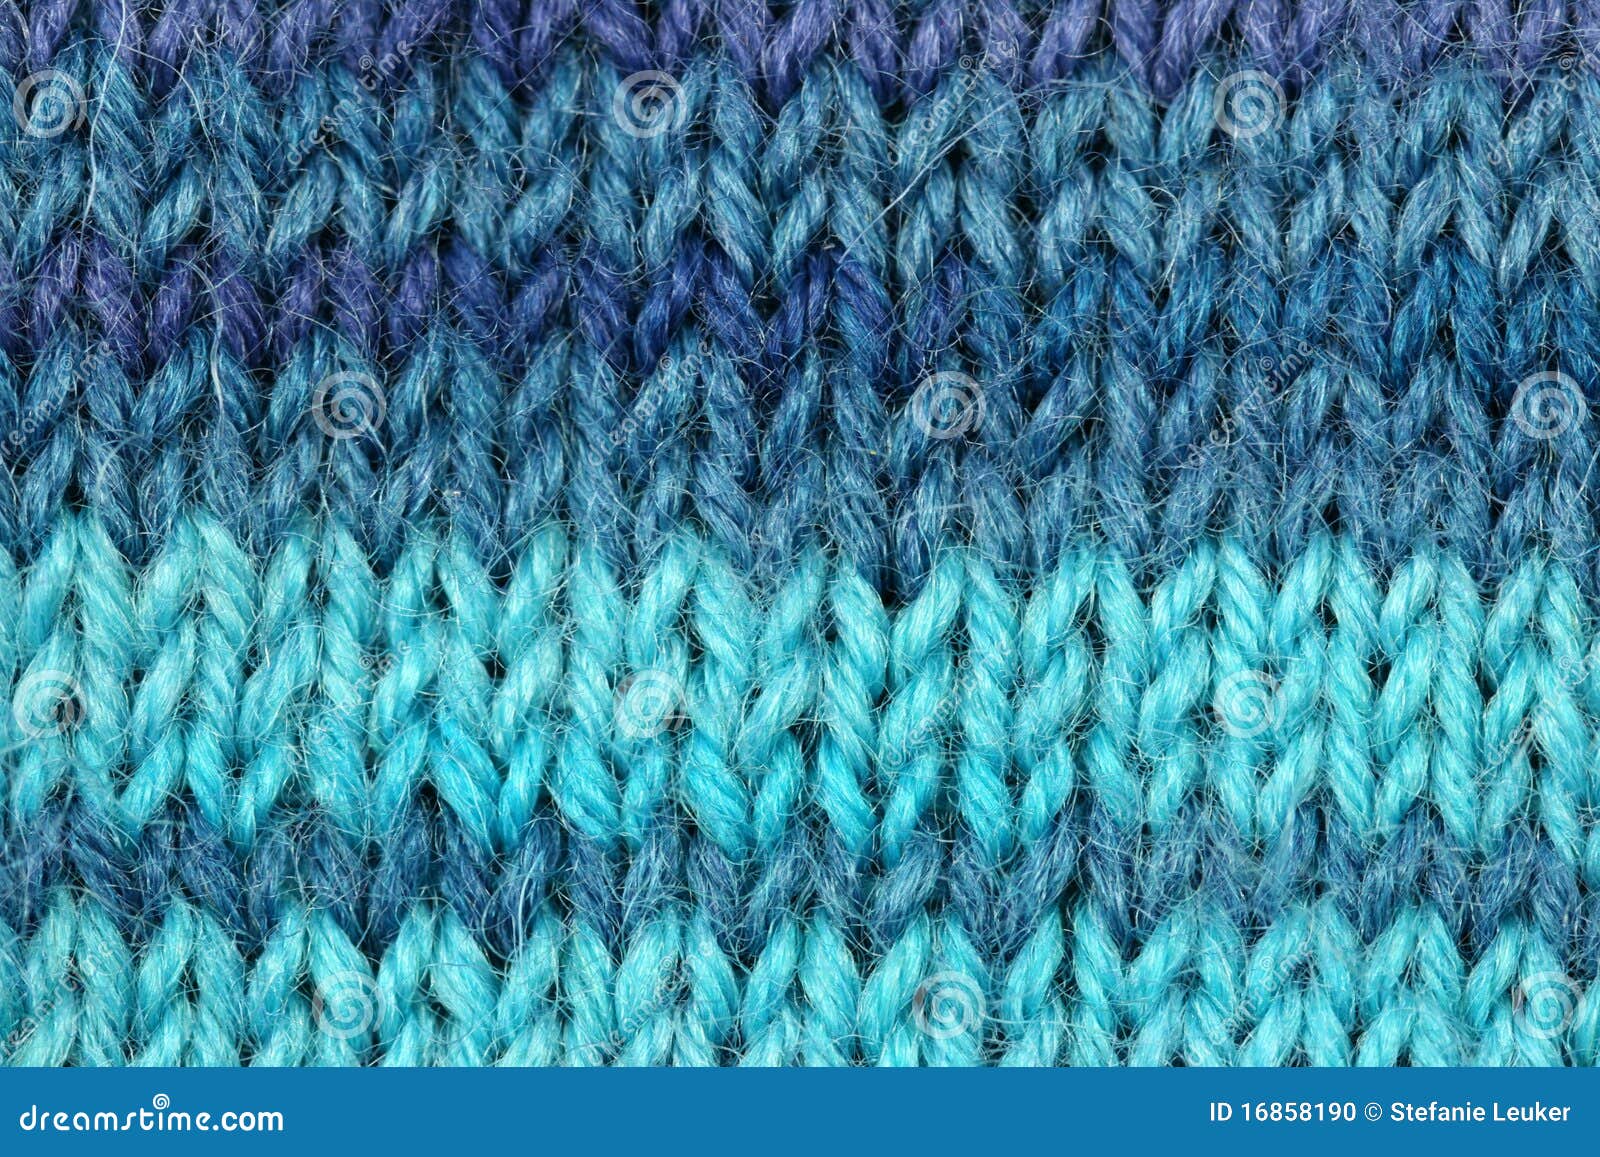 http://thumbs.dreamstime.com/z/knitted-wool-texture-16858190.jpg